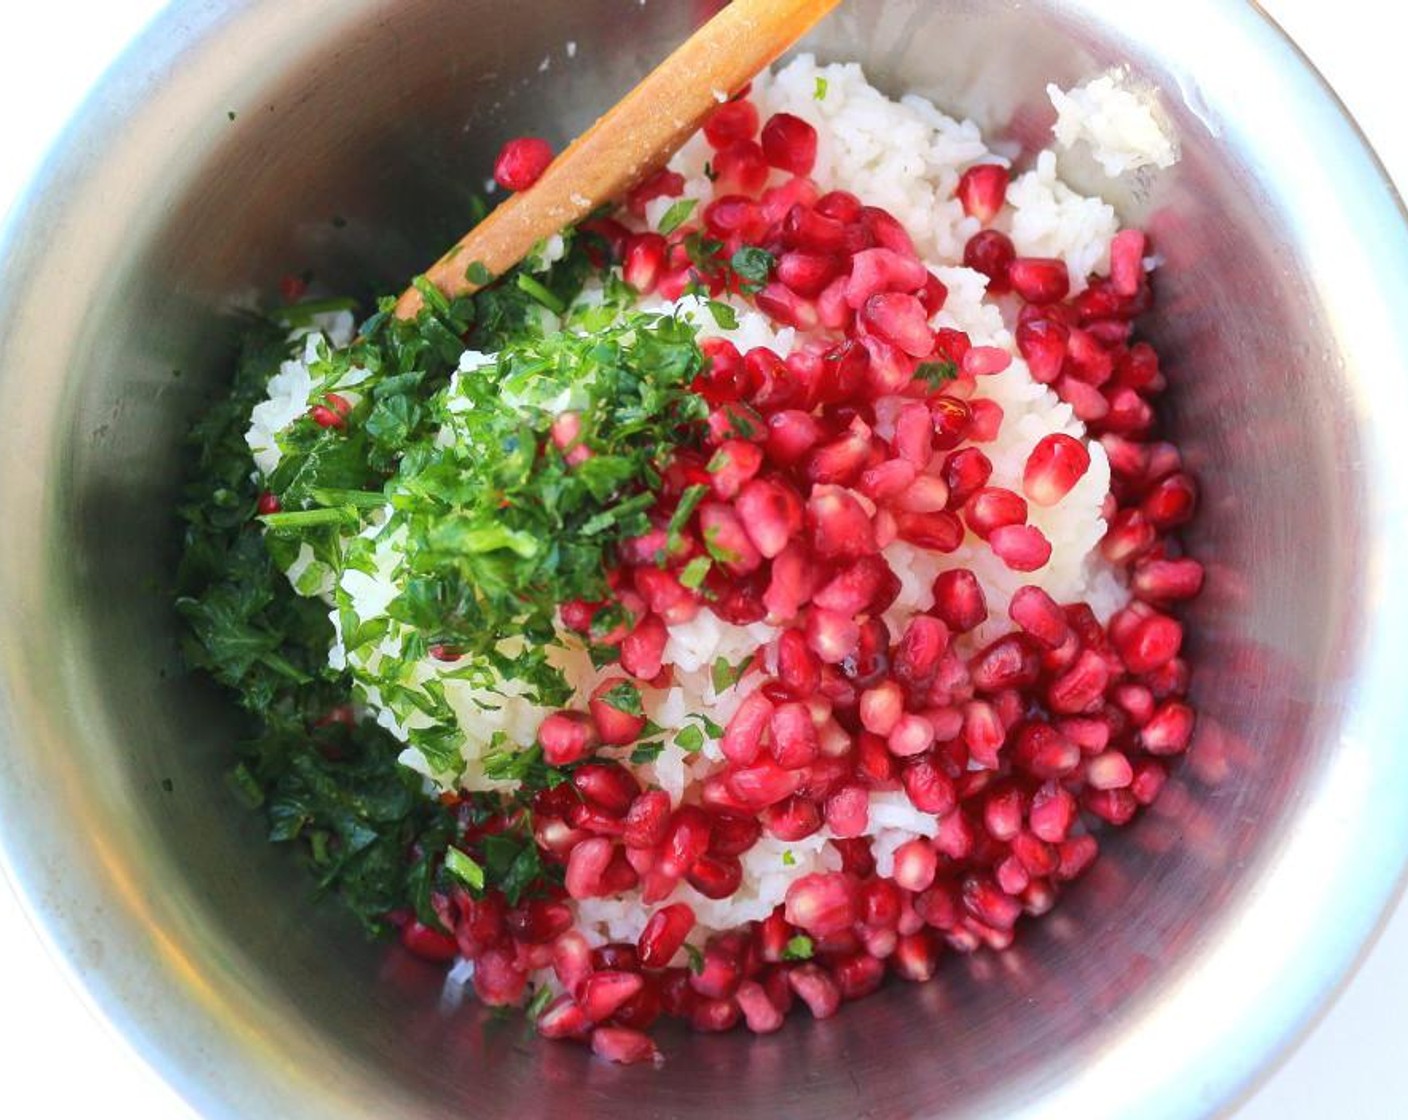 step 6 While the tonkatsu are cooking, mix White Rice (4 cups) with Butter (1/2 cup), Fresh Cilantro (1/4 cup) and Pomegranate Seeds (2 2/3 cups). Mix carefully as not to mash-up the rice or the seeds.